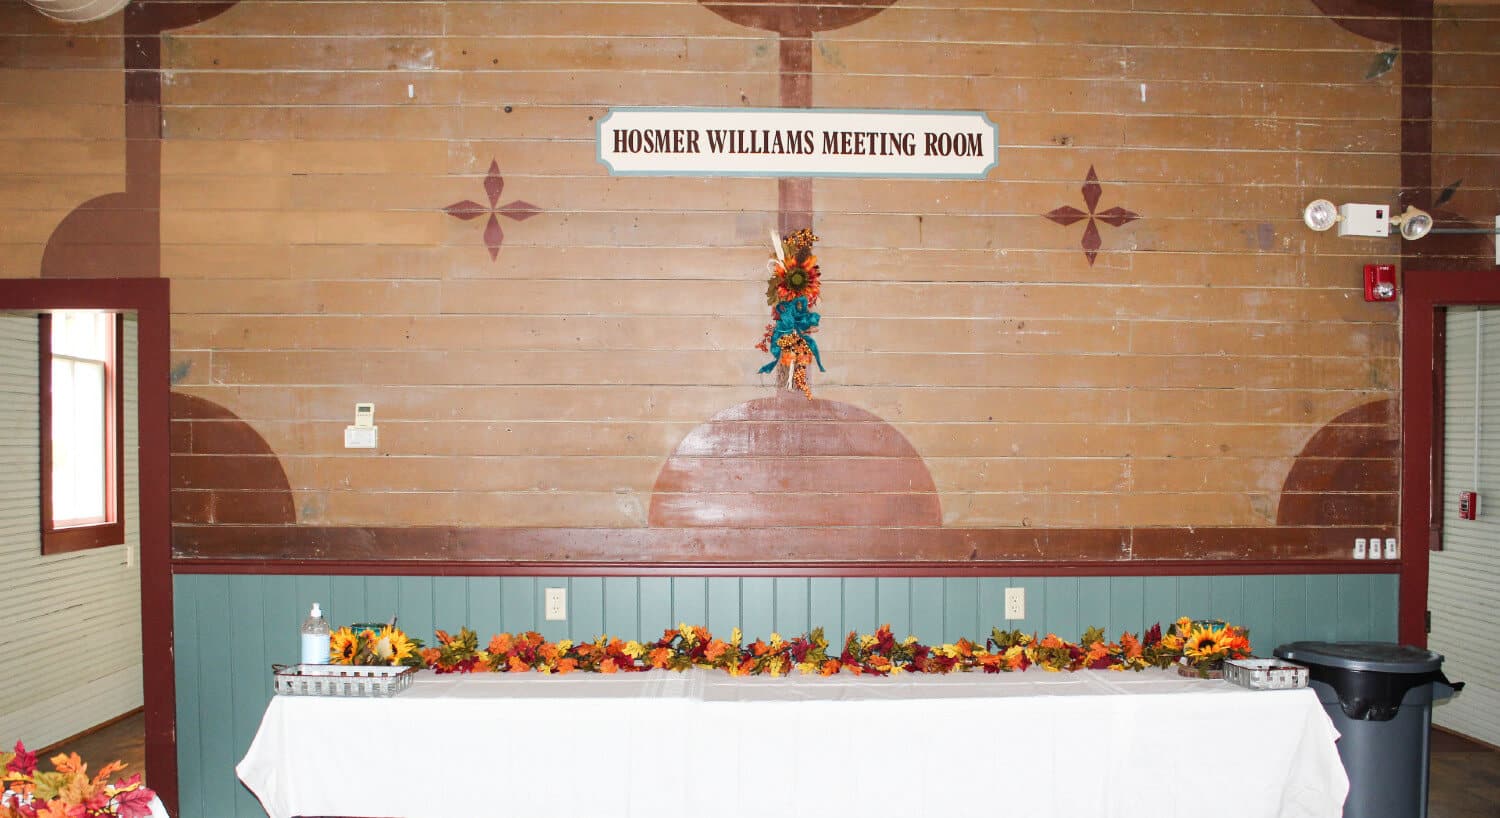 hosmer williams meeting room on brown wood with buffet table with white table close decorated with fall flowers and flower arrangement hanging on wall